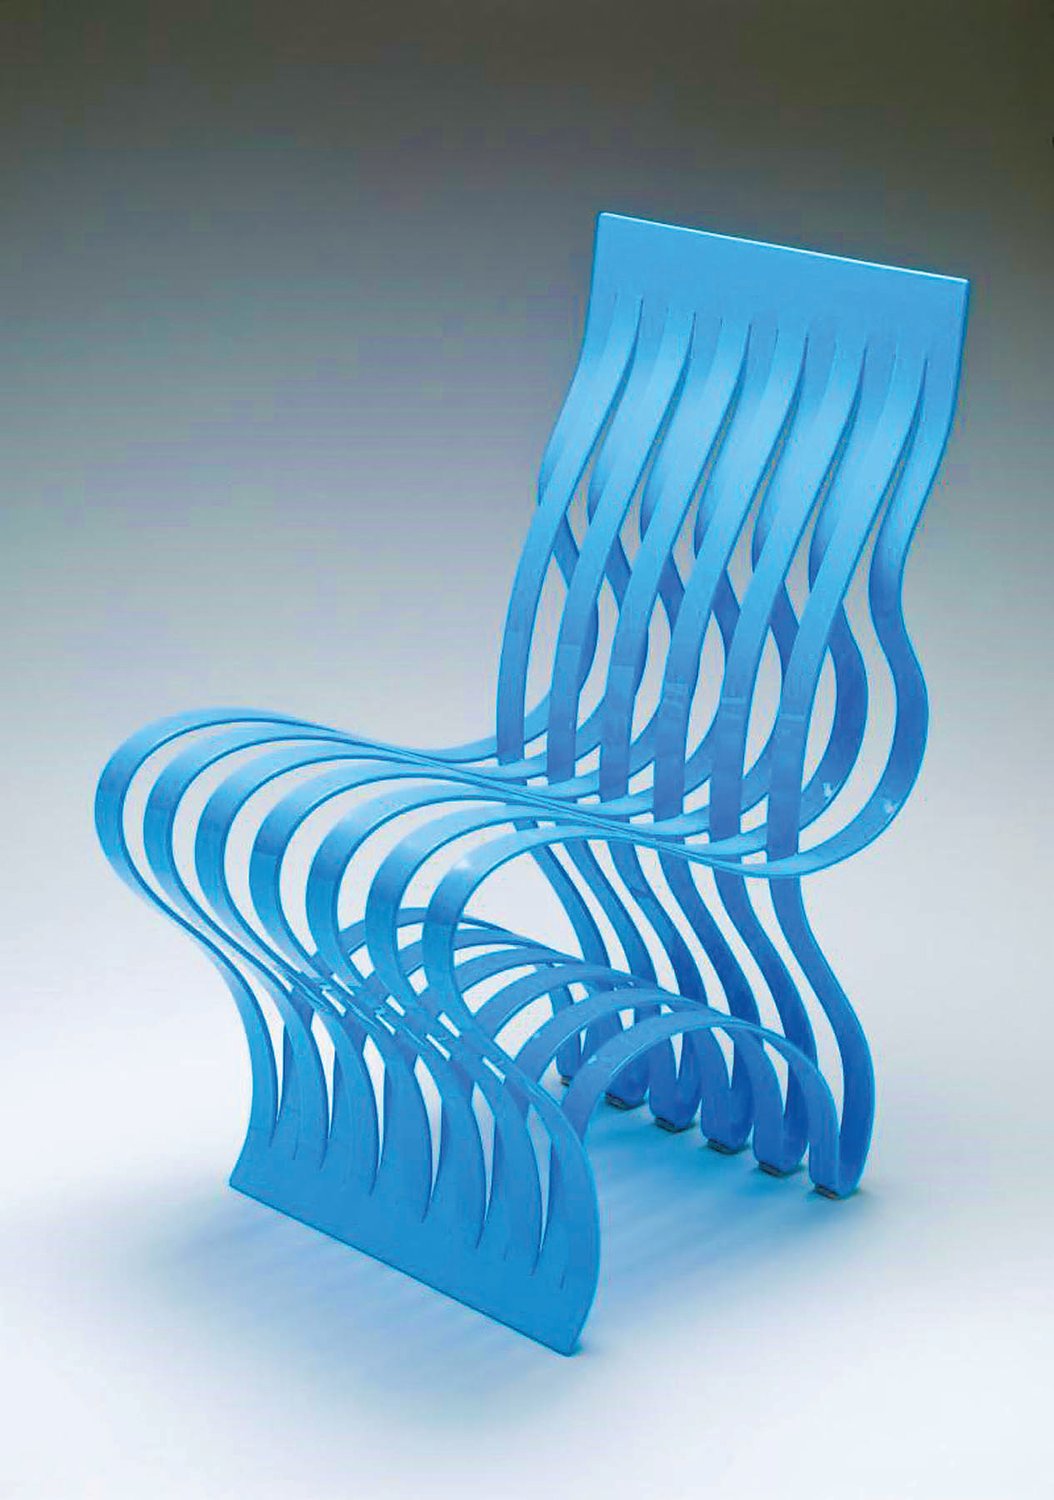 “The Art of Seating: 200 Years of American Design,” opens Feb. 9, at The James A. Michener Art Museum in Doylestown.